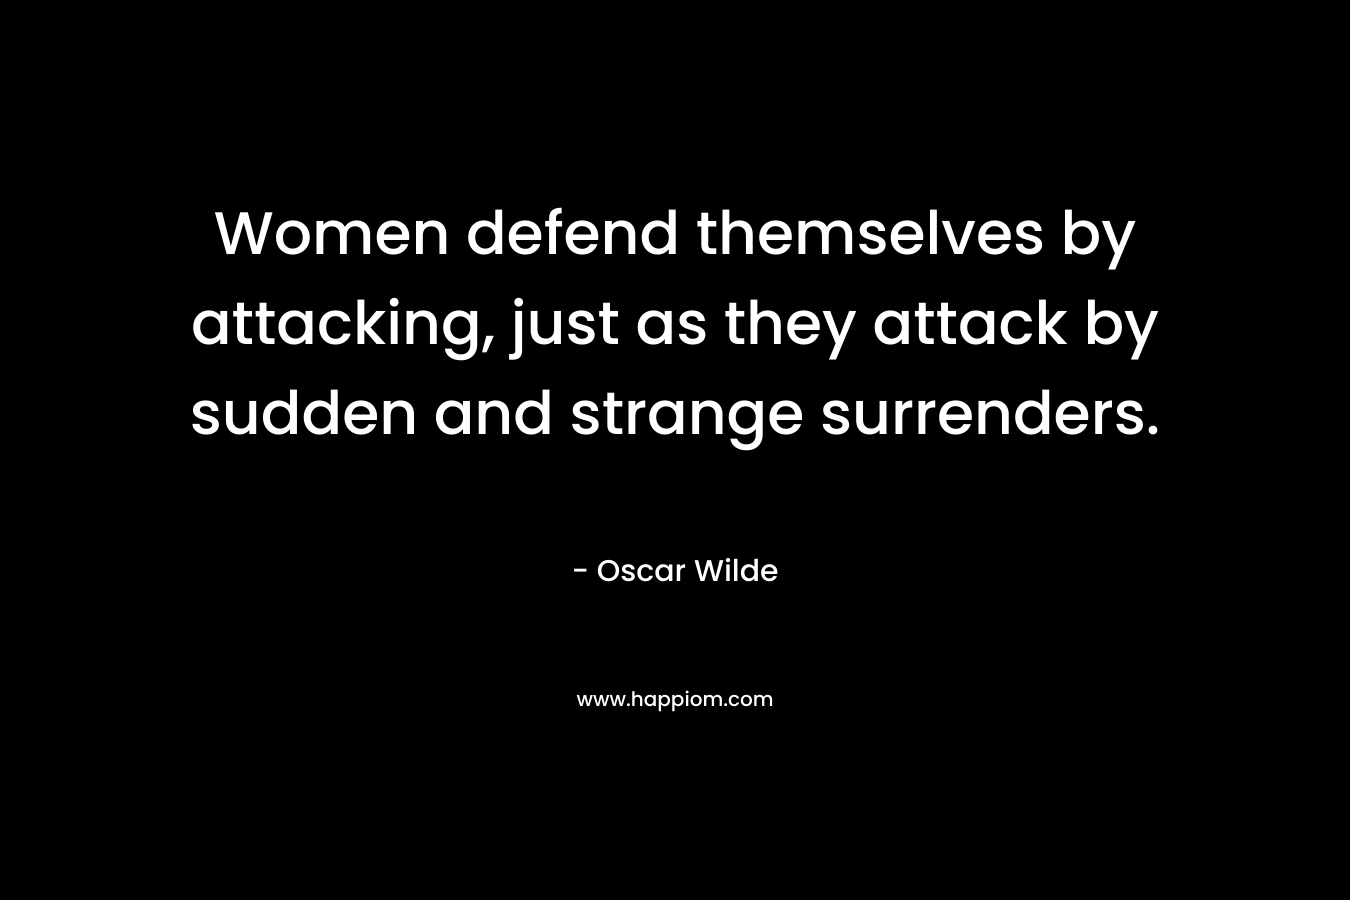 Women defend themselves by attacking, just as they attack by sudden and strange surrenders. – Oscar Wilde